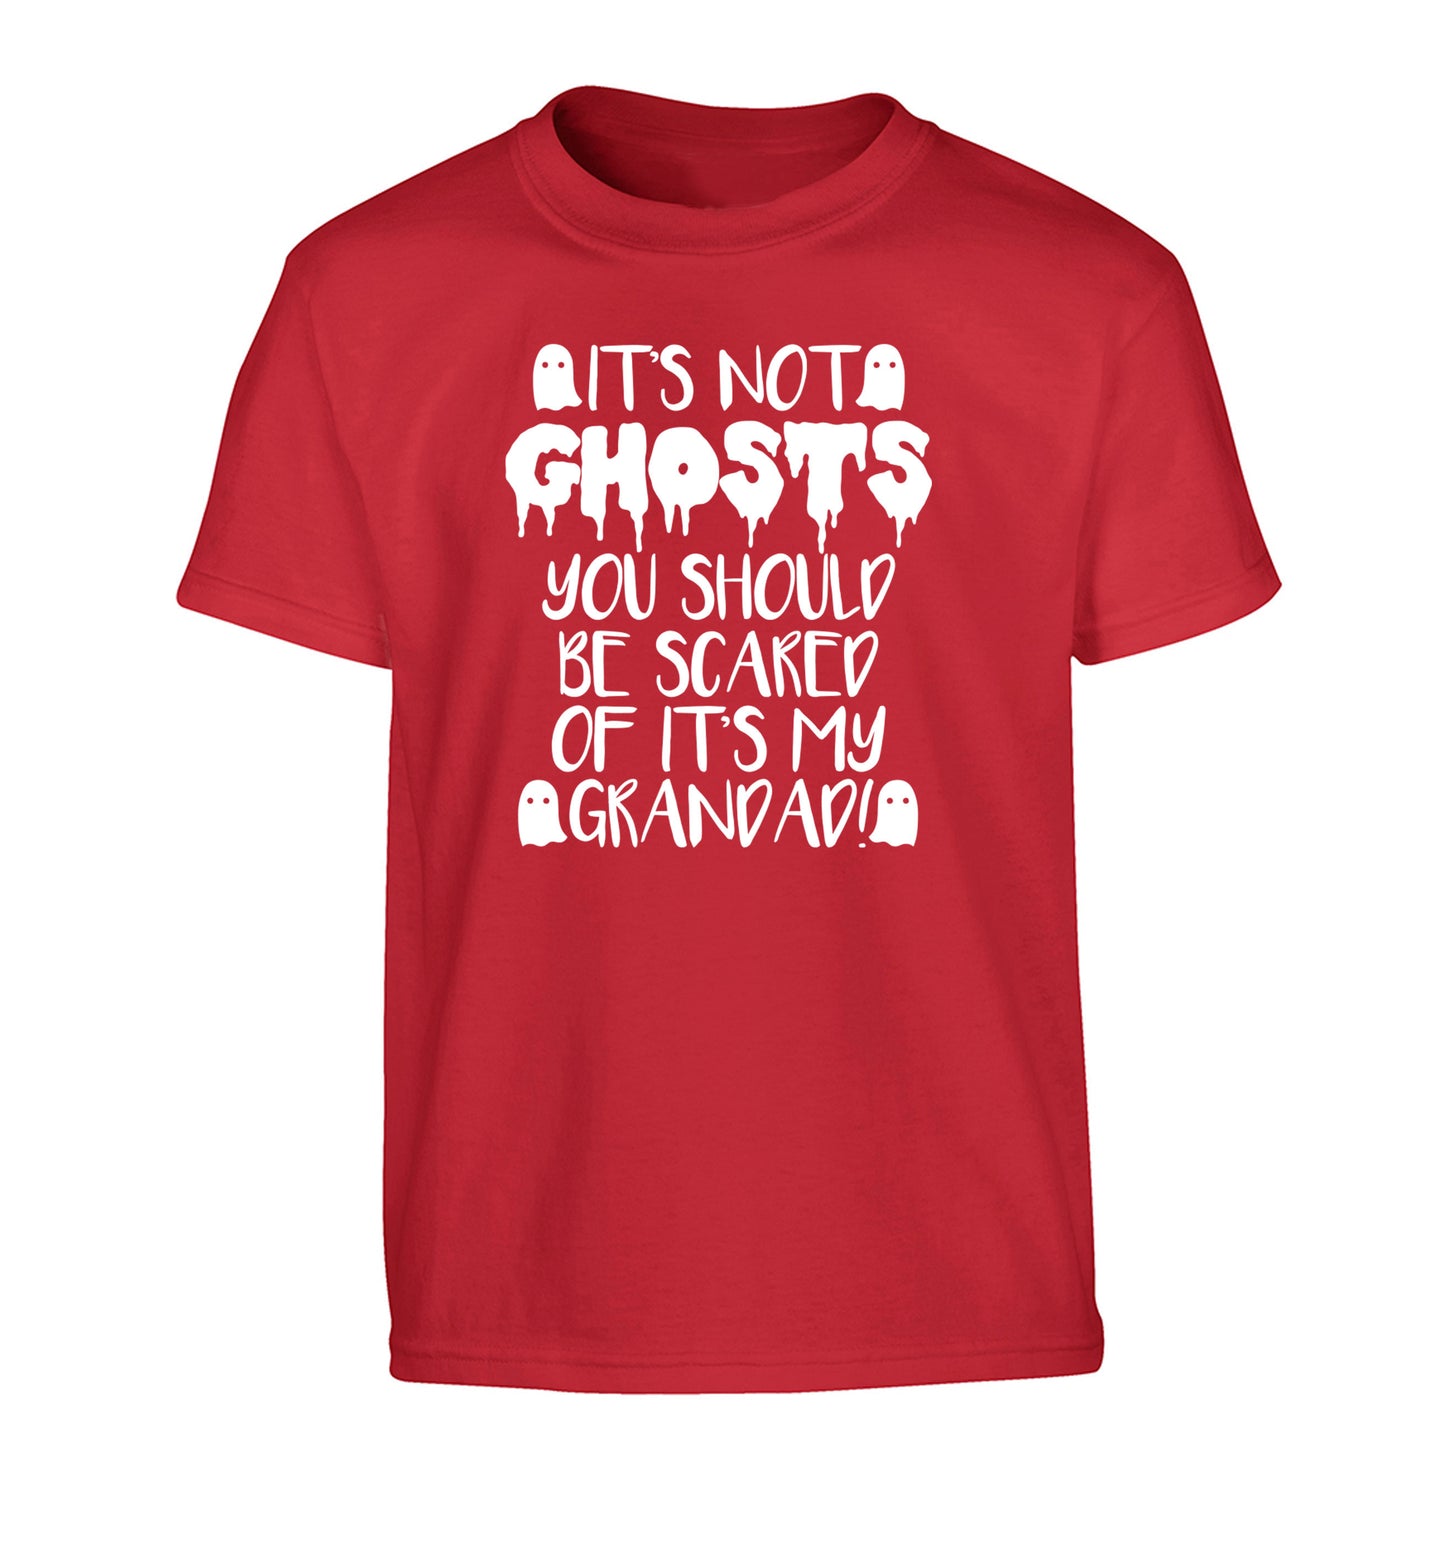 It's not ghosts you should be scared of it's my grandad! Children's red Tshirt 12-14 Years